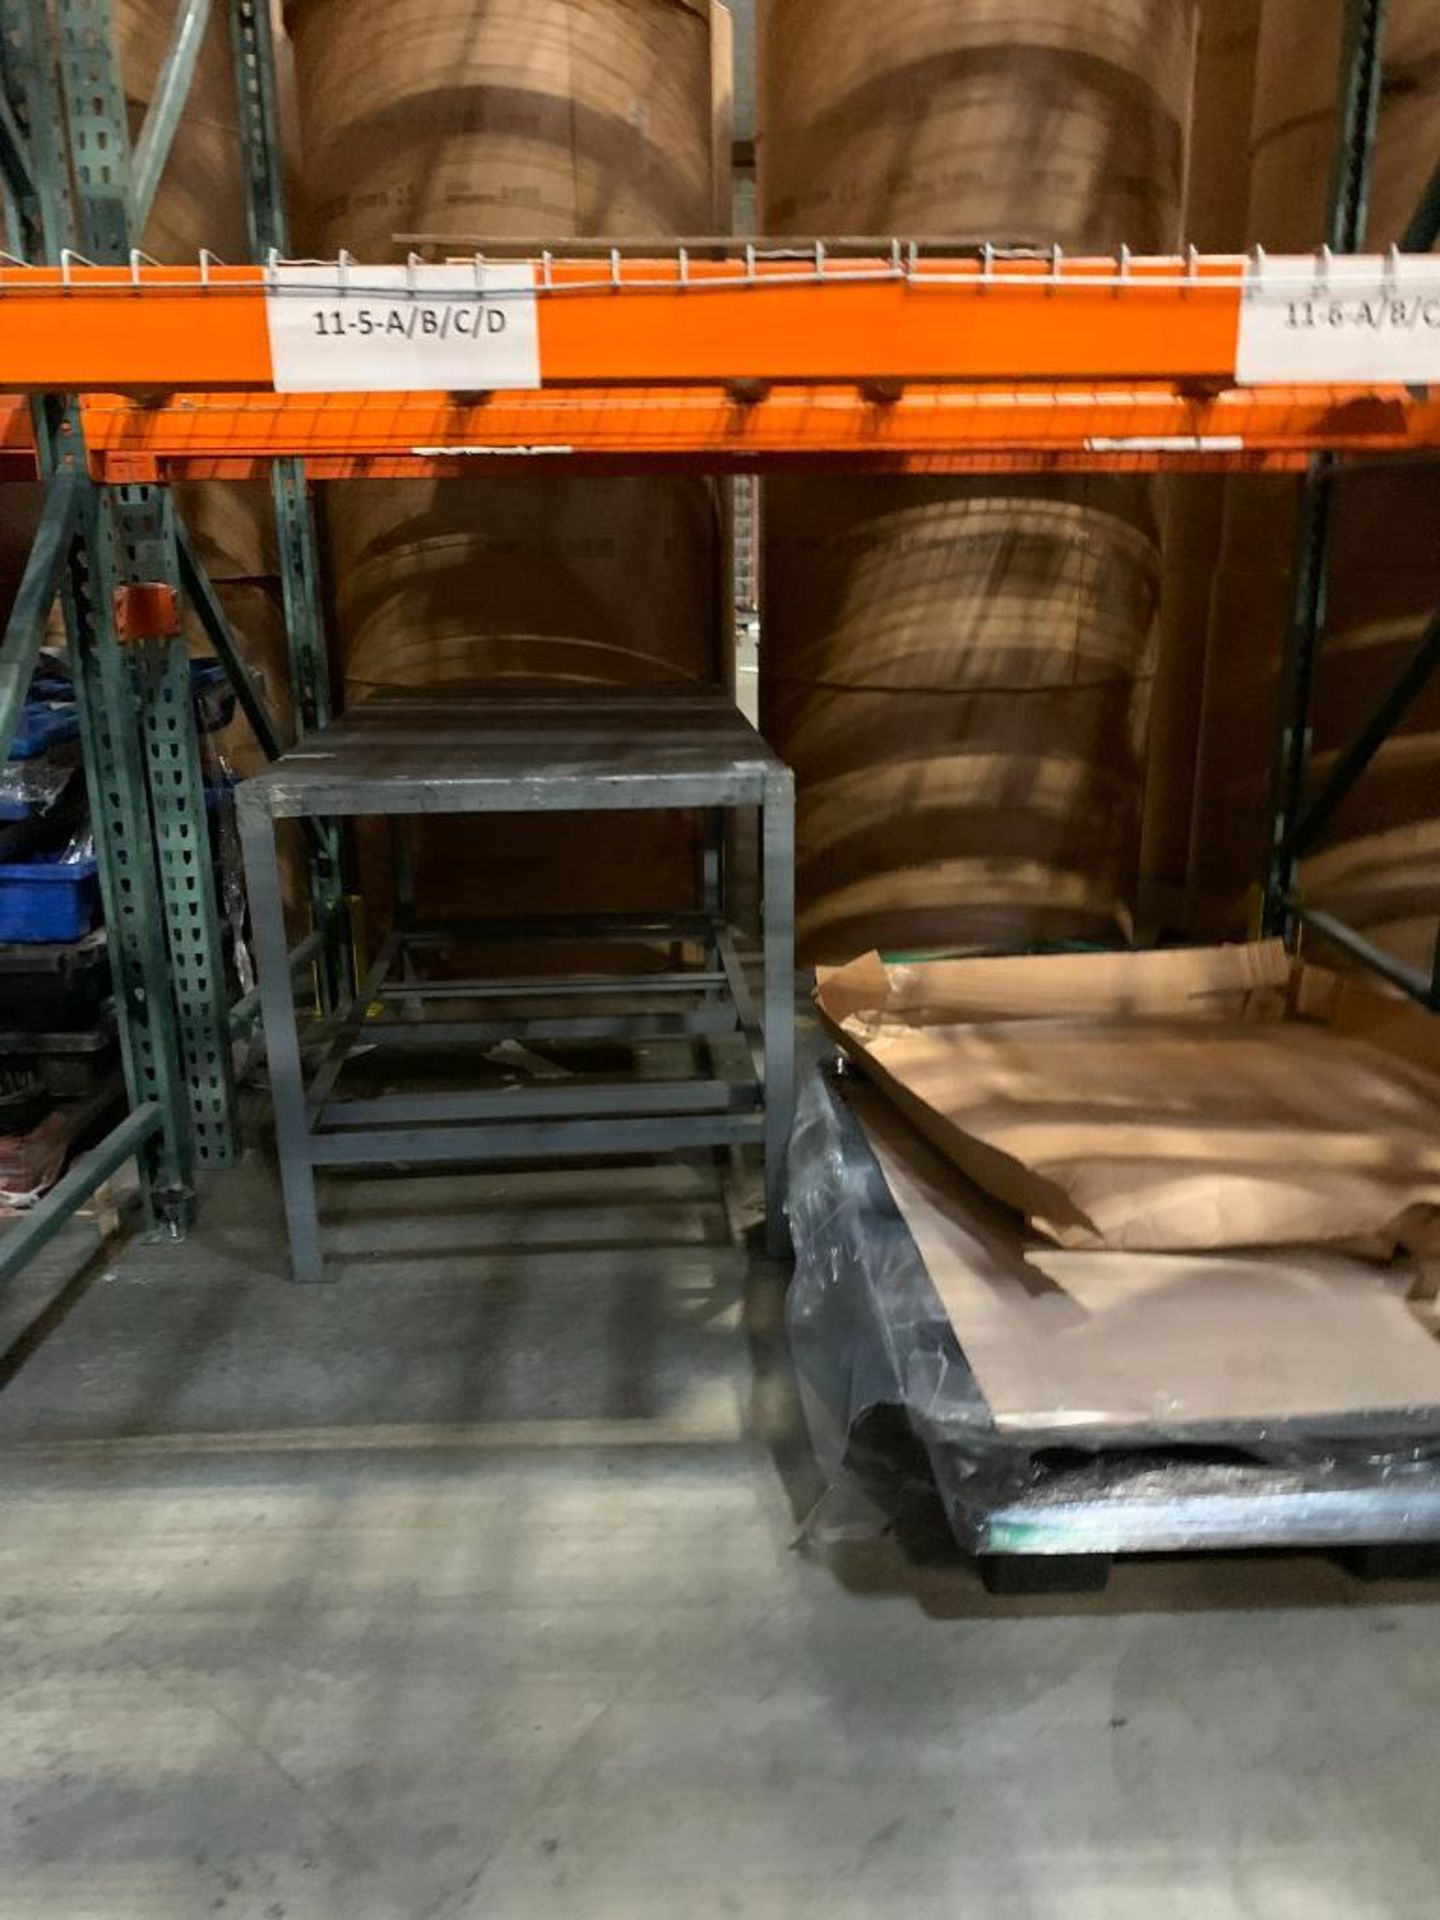 Content on (6) Rows of Pallet Rack: Inserter Parts, Assorted Joggers, Electric Motors, Utility Light - Image 36 of 48